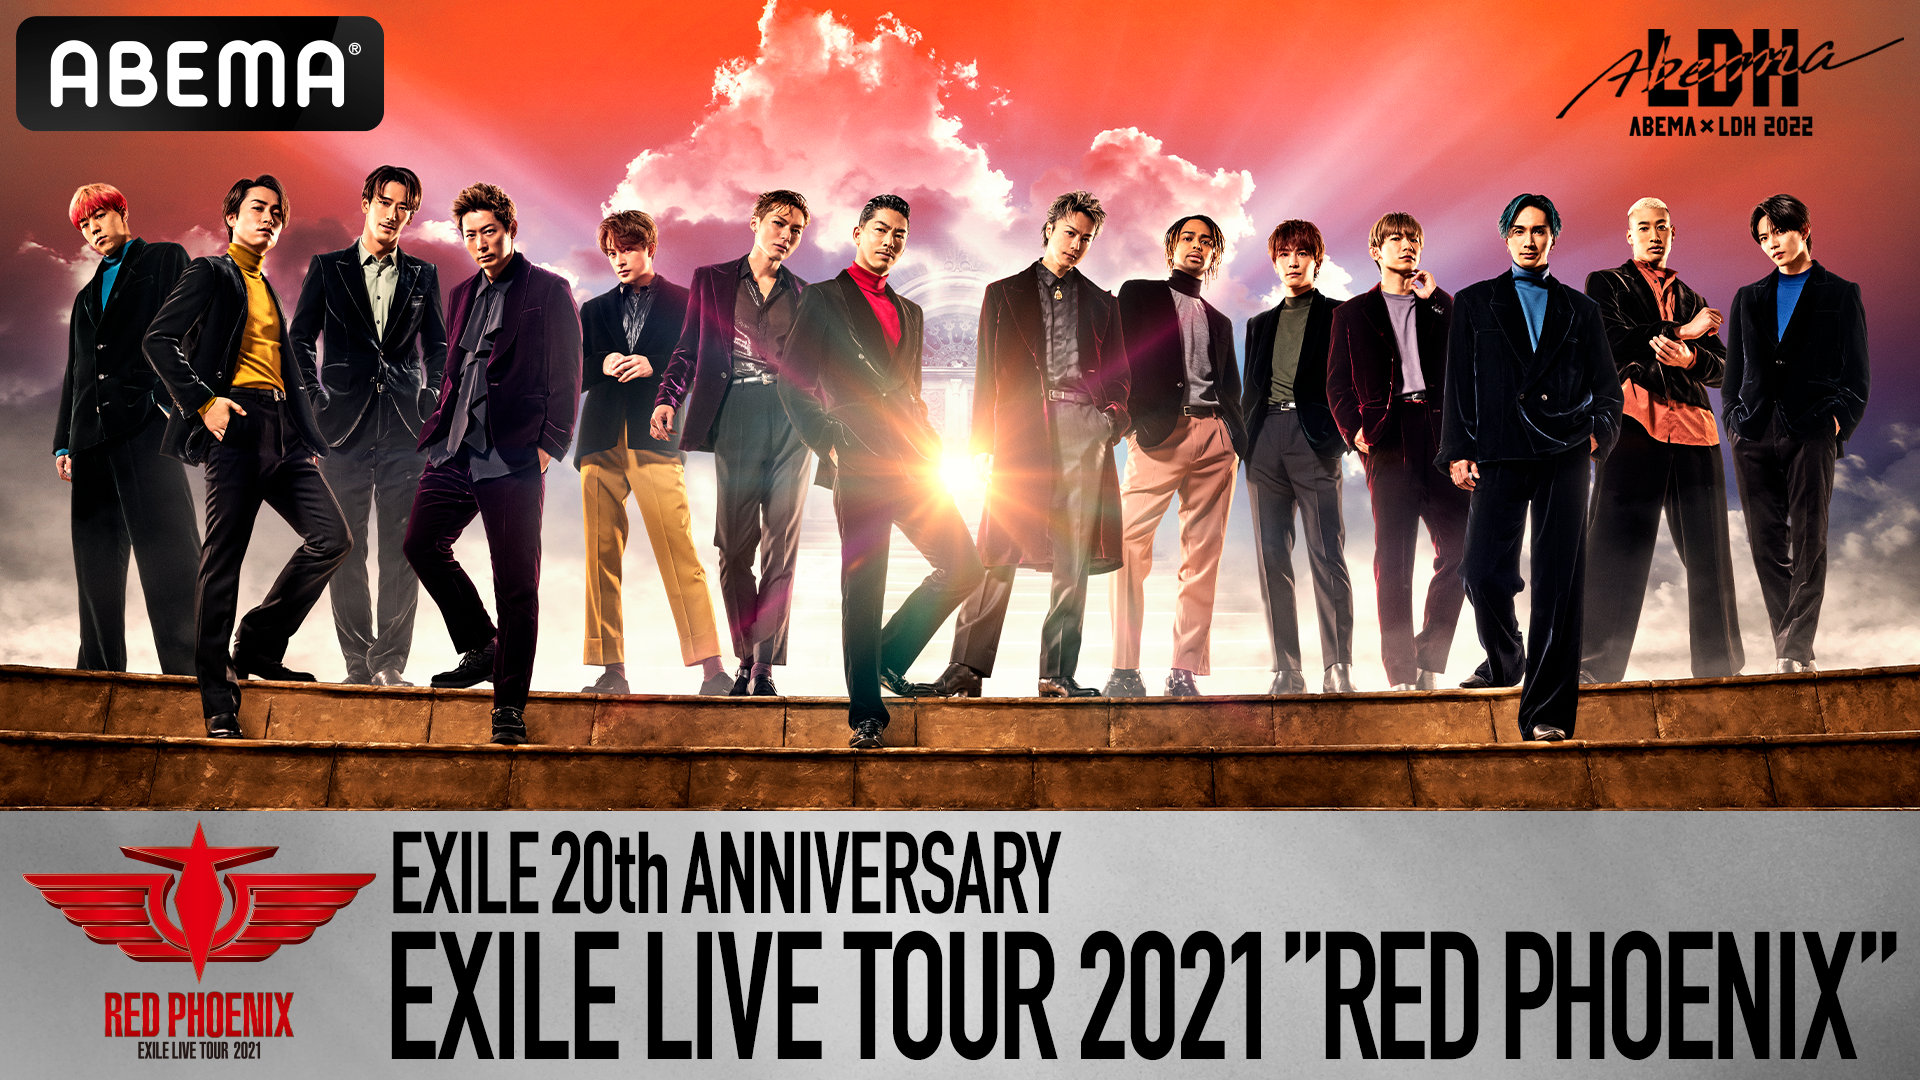 Exile th Anniversary Exile Live Tour 21 Red Phoenix アリーナツアーファイナルを18時よりabemaで生配信決定 Abema Ppv Online Live Abema